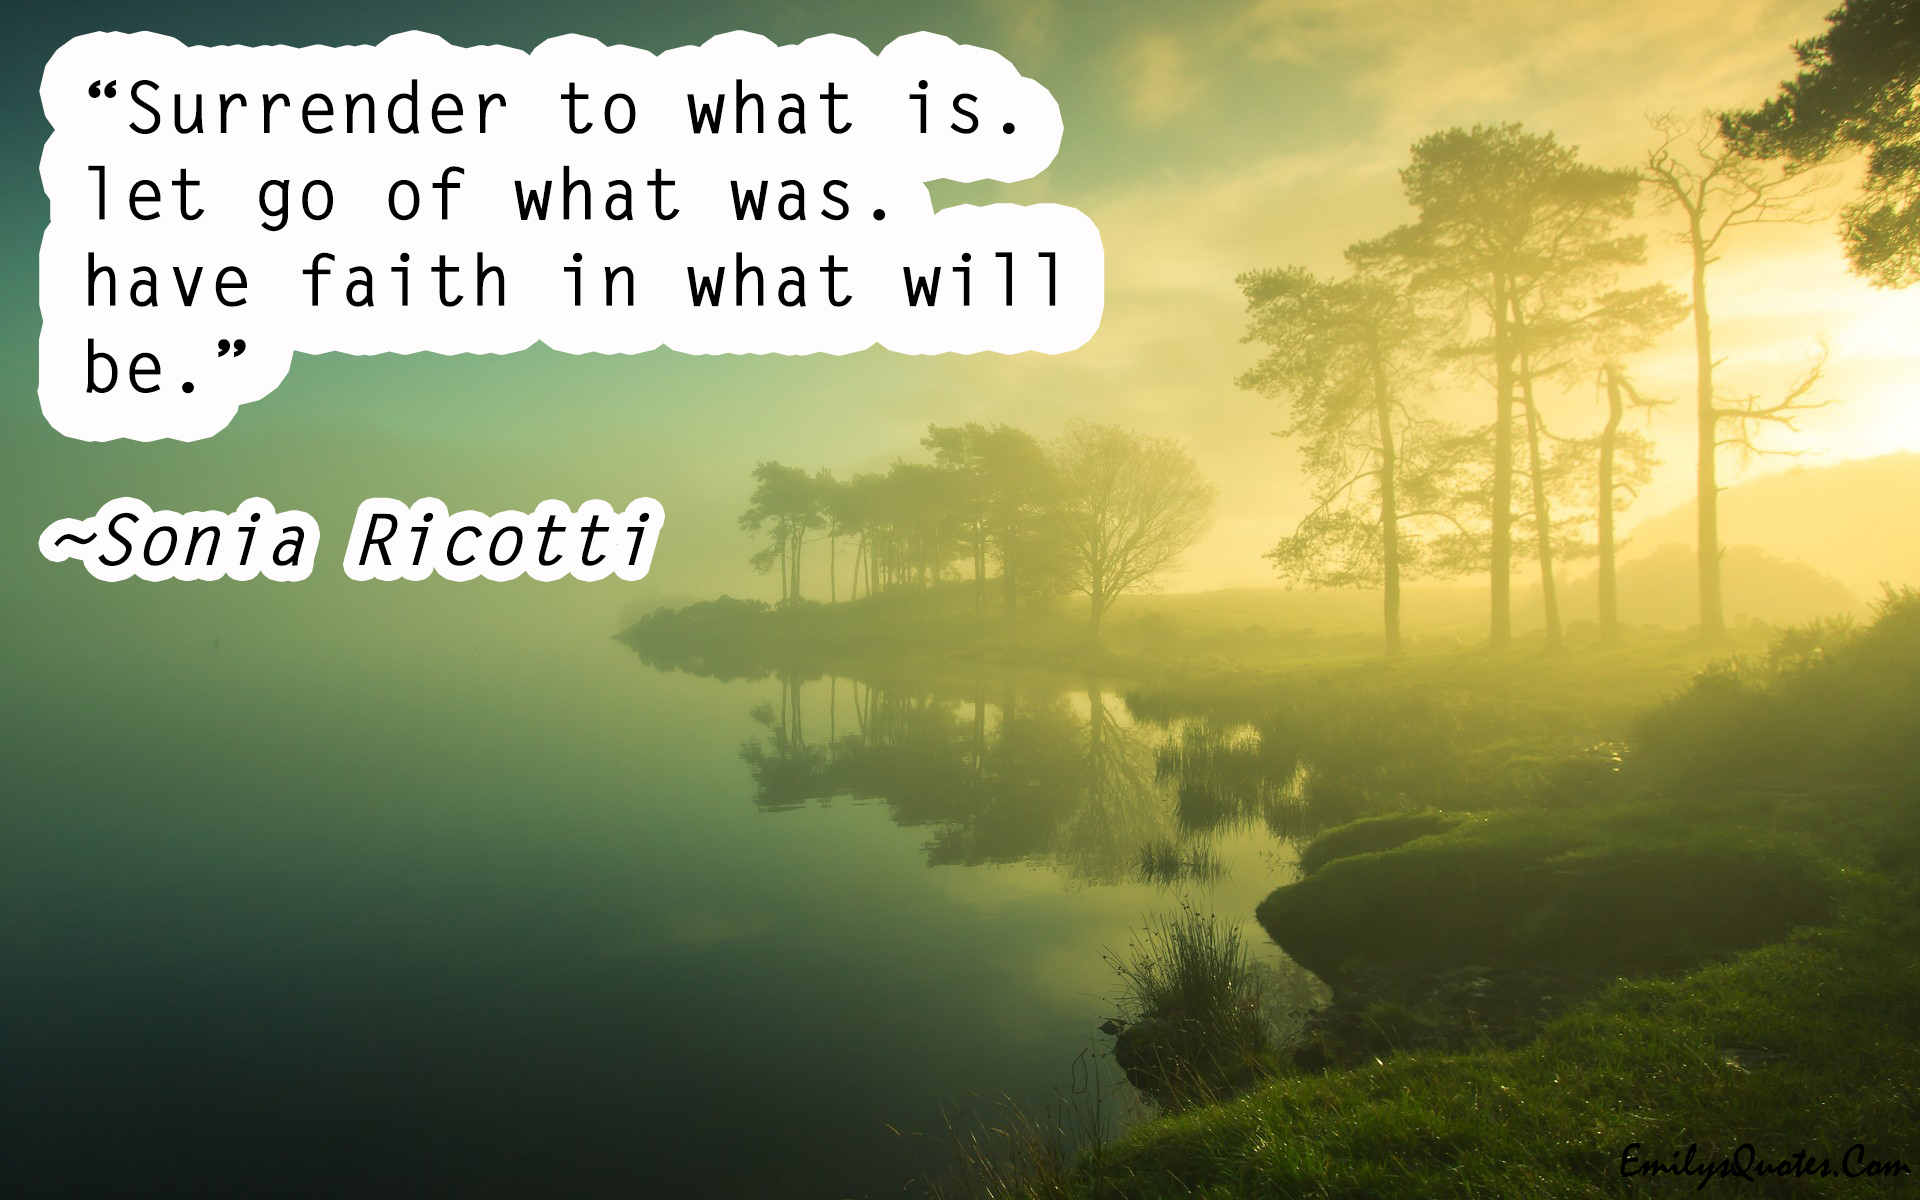 Surrender to what is. Let go of what was. Have faith in what will be